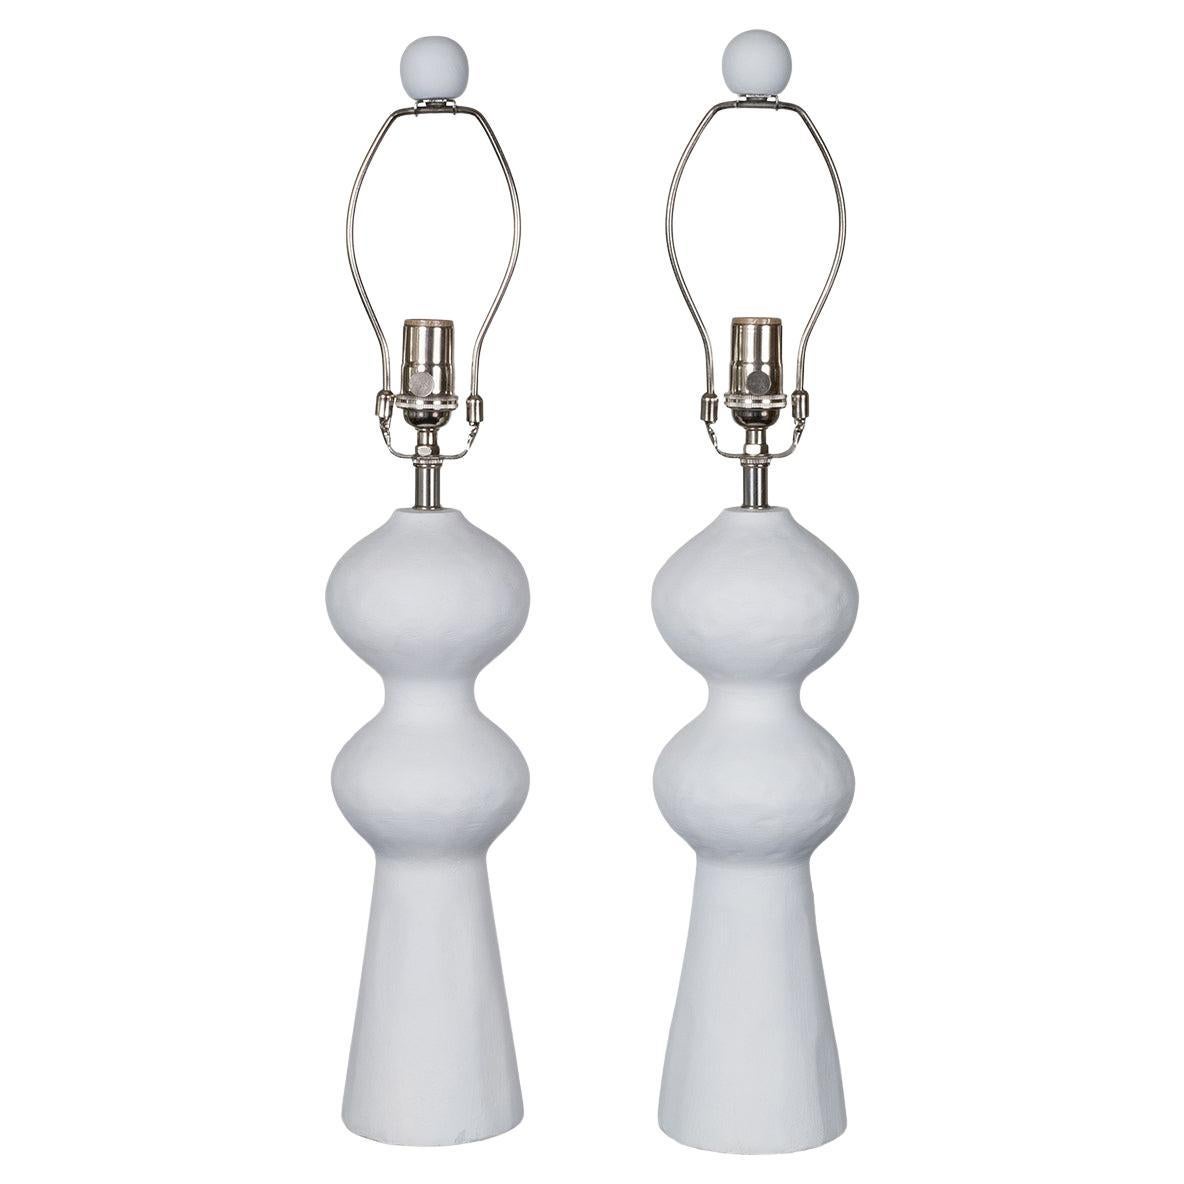 Pair of composition organic table lamps